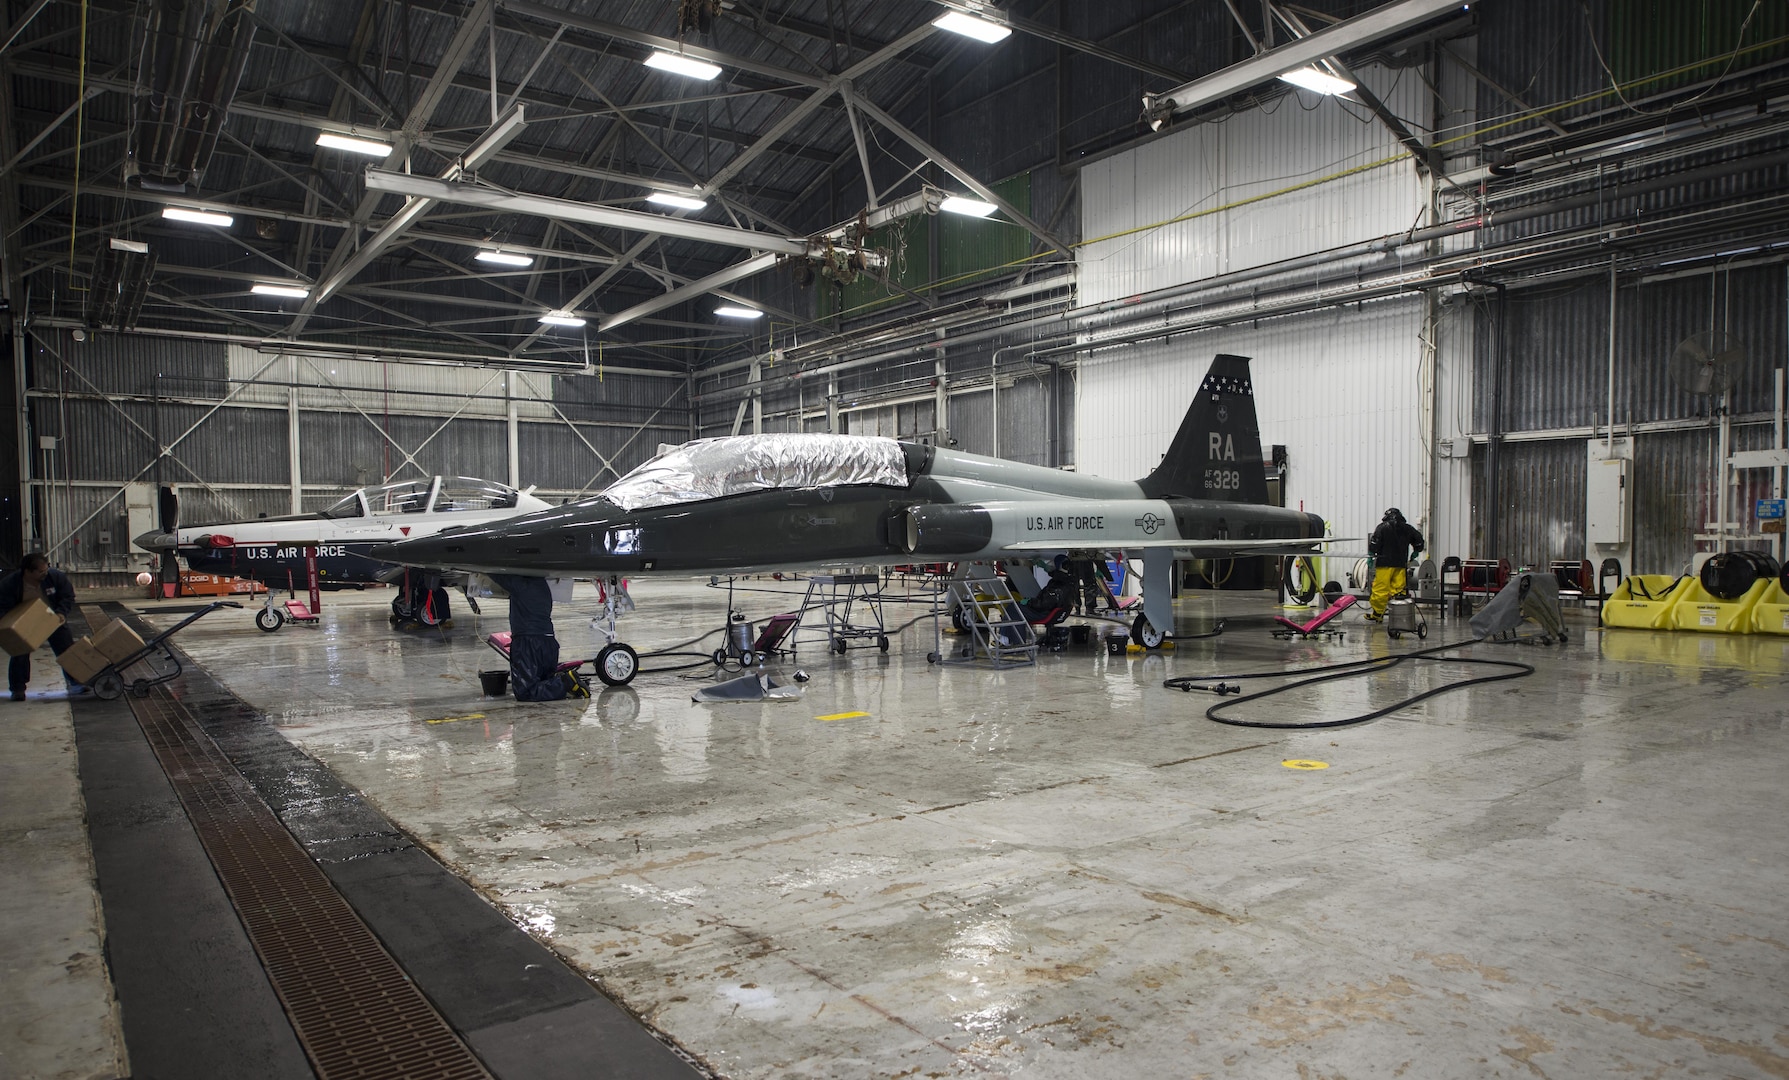 Members of the 12th Flying Training Wing Maintenance Directorate wash a T-38 Talon Feb. 2 at the new wash rack inside Hangar 42 at Joint Base San Antonio-Randolph. The 14-member corrosion control team now has its own indoor wash rack in Hangar 42 with benefits that include washes unimpeded by weather conditions and an environmentally friendly water-recycling system that conserves water, saving the Air Force $174,000 per year.